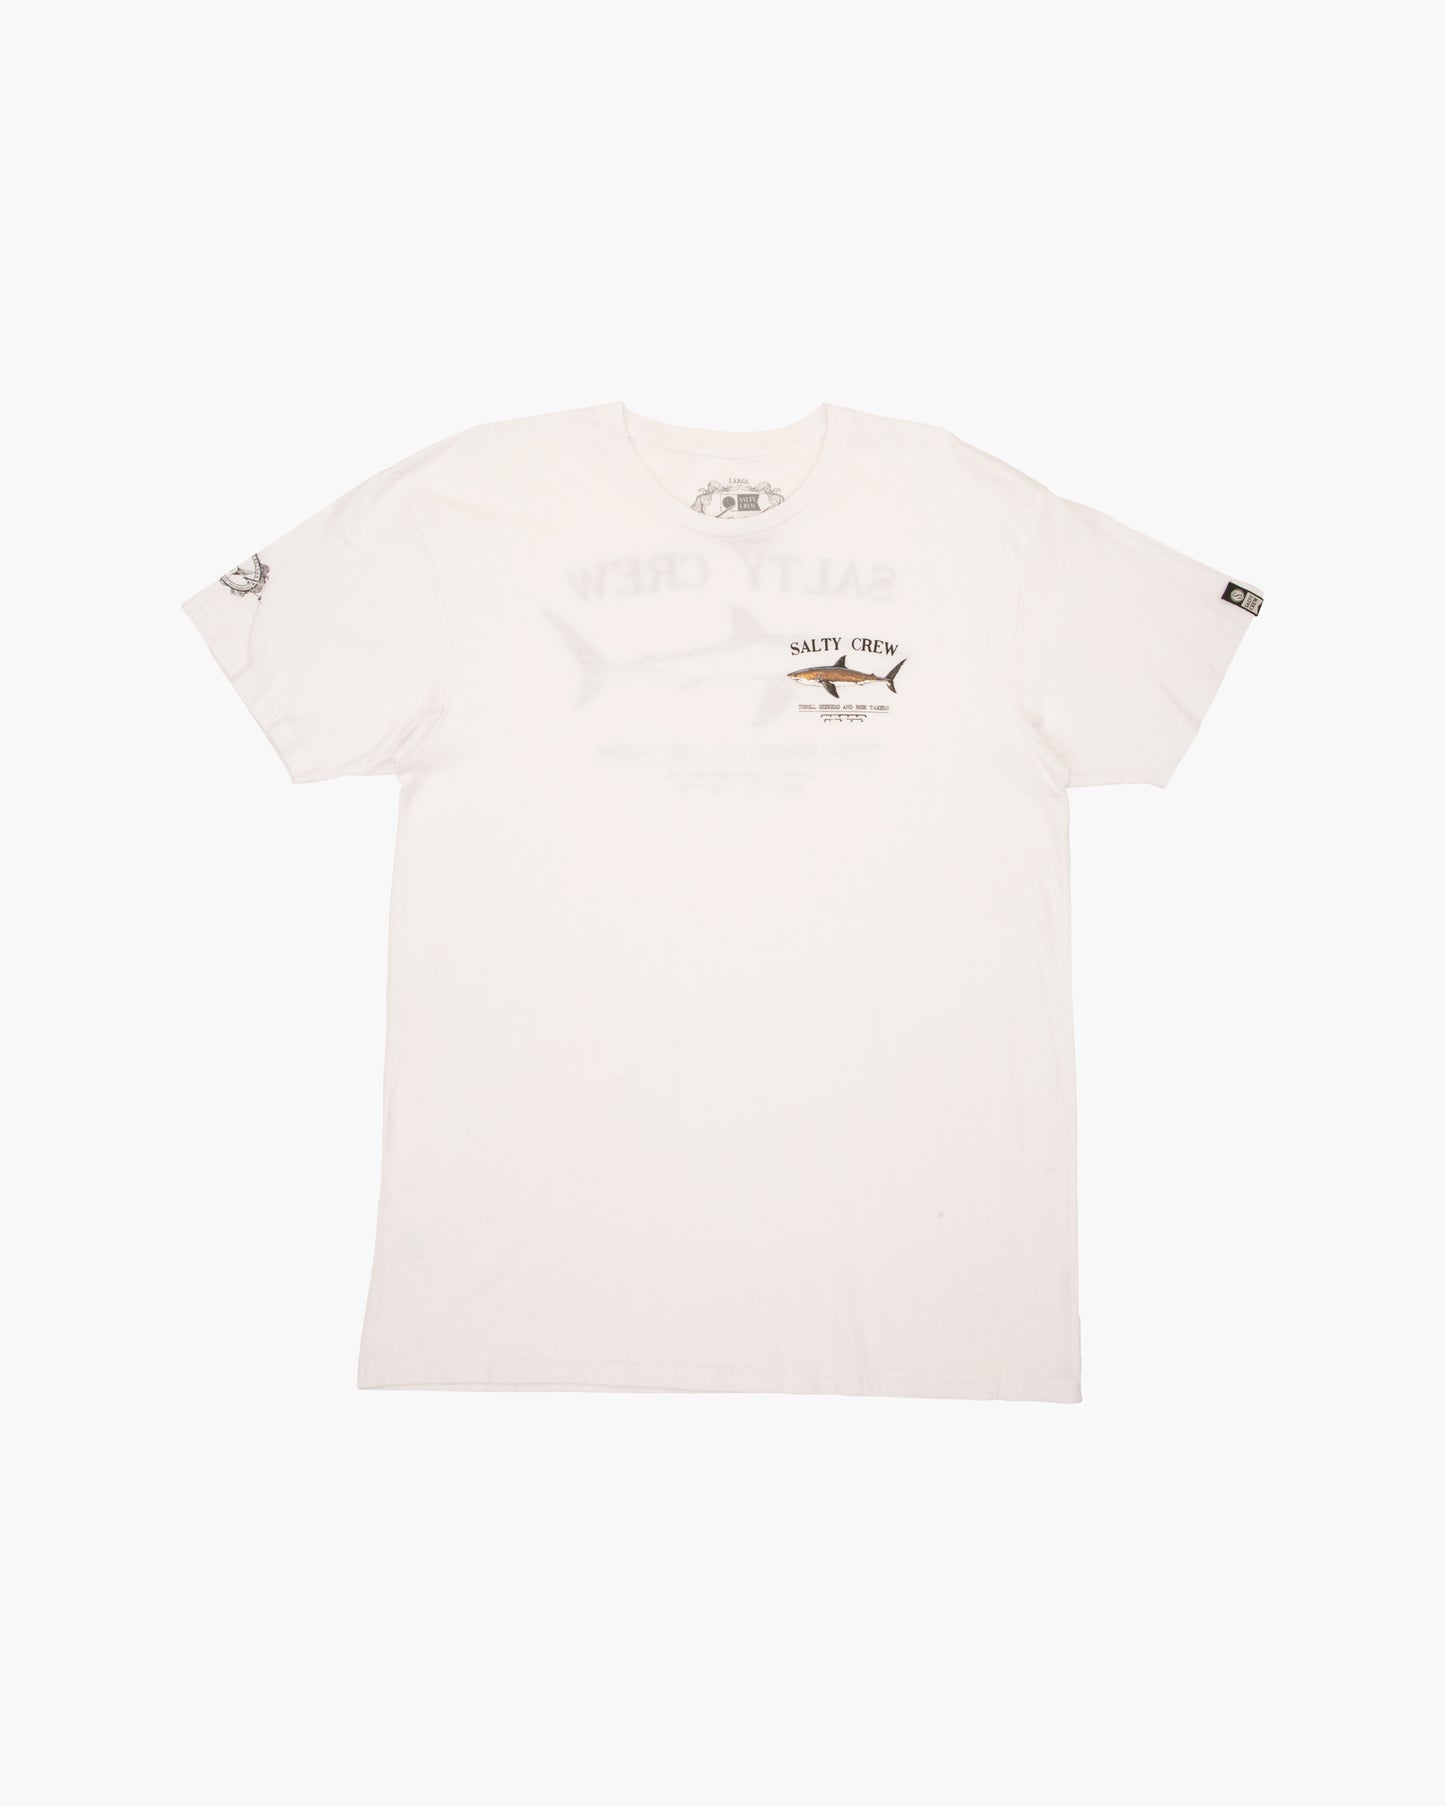 Off body front of Bruce White Premium S/S Tee